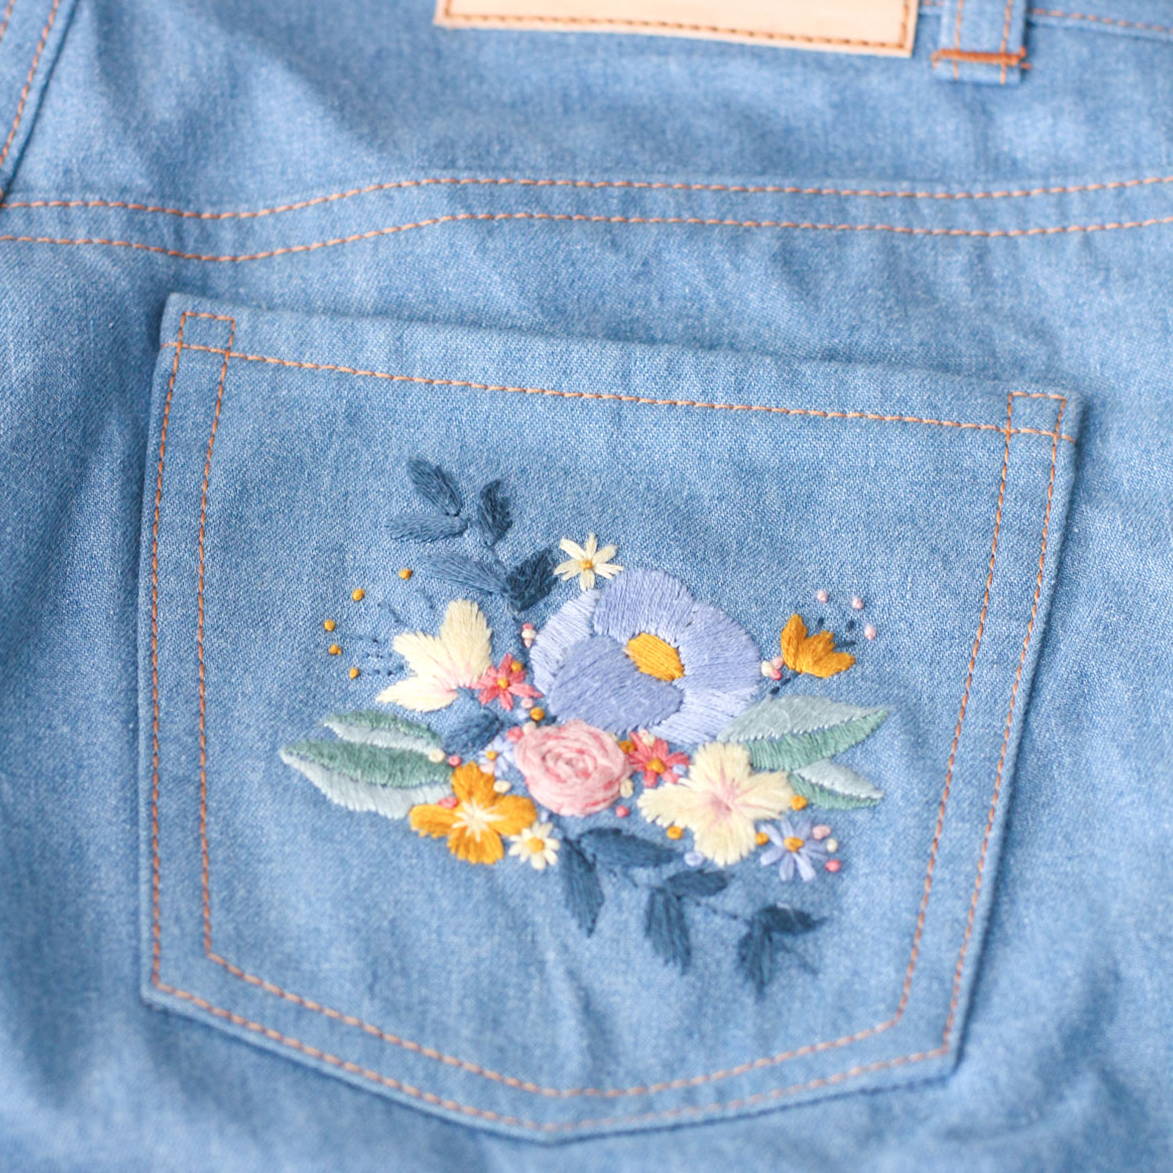 Tips for embroidered jeans